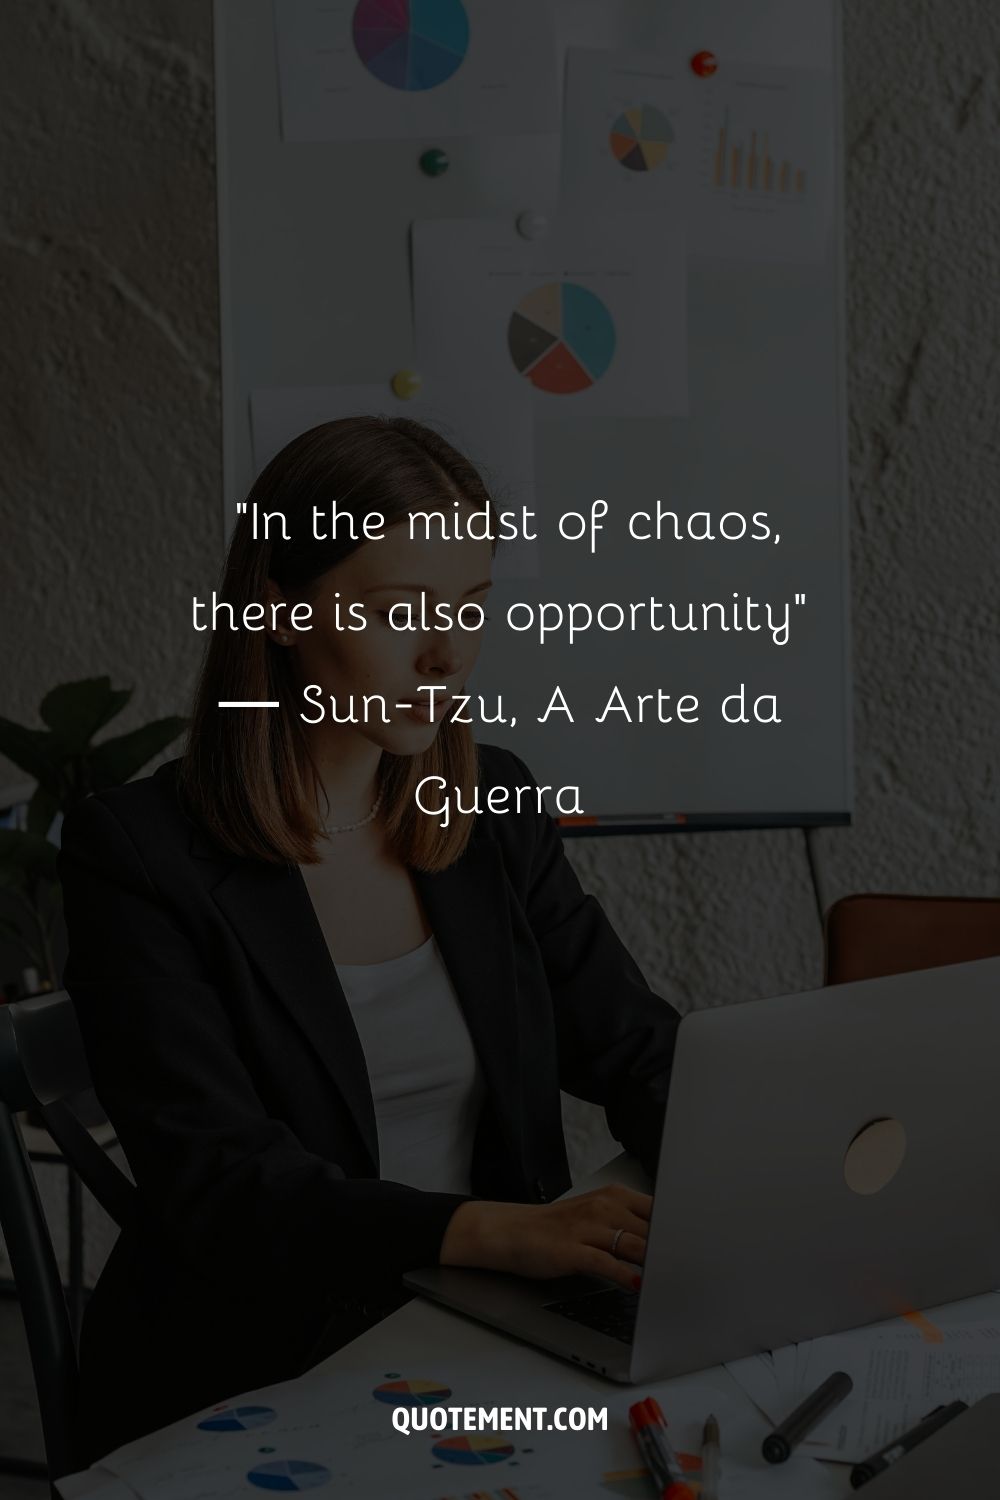 “In the midst of chaos, there is also opportunity” ― Sun-Tzu, A Arte da Guerra